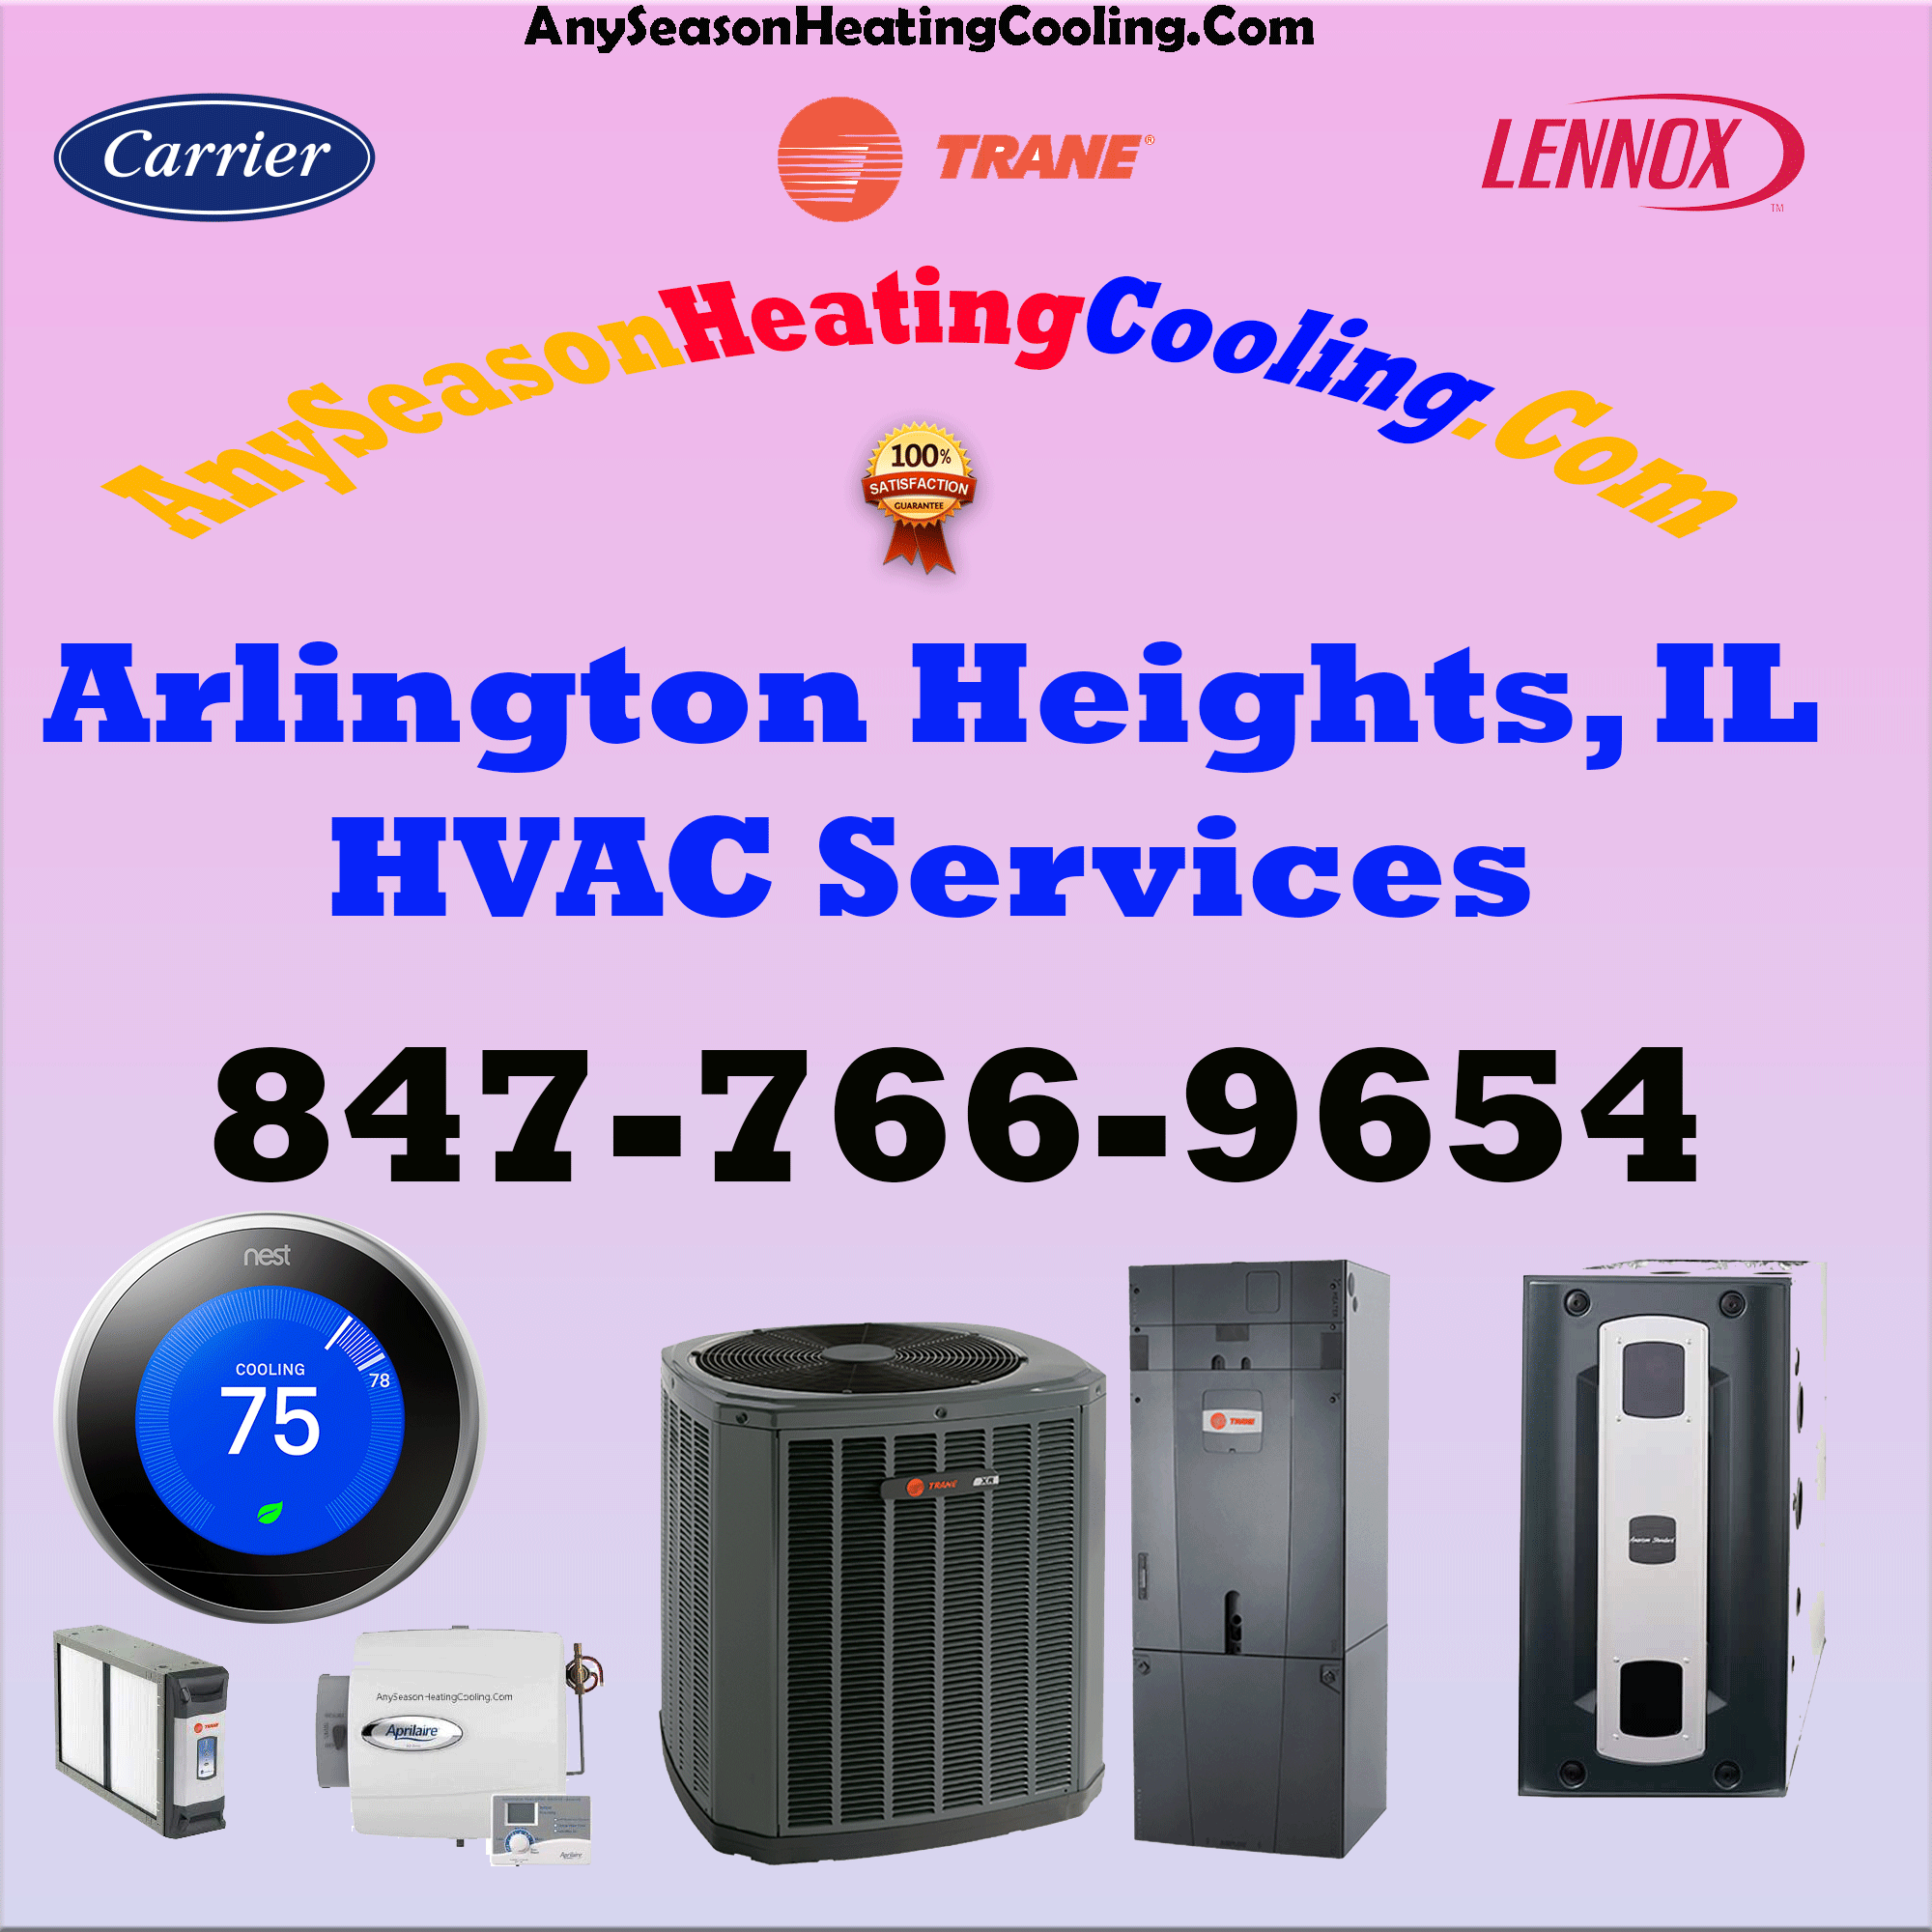 Arlington Heights Furnace Replacement for Less & Furnace & AC Repair Near Me 